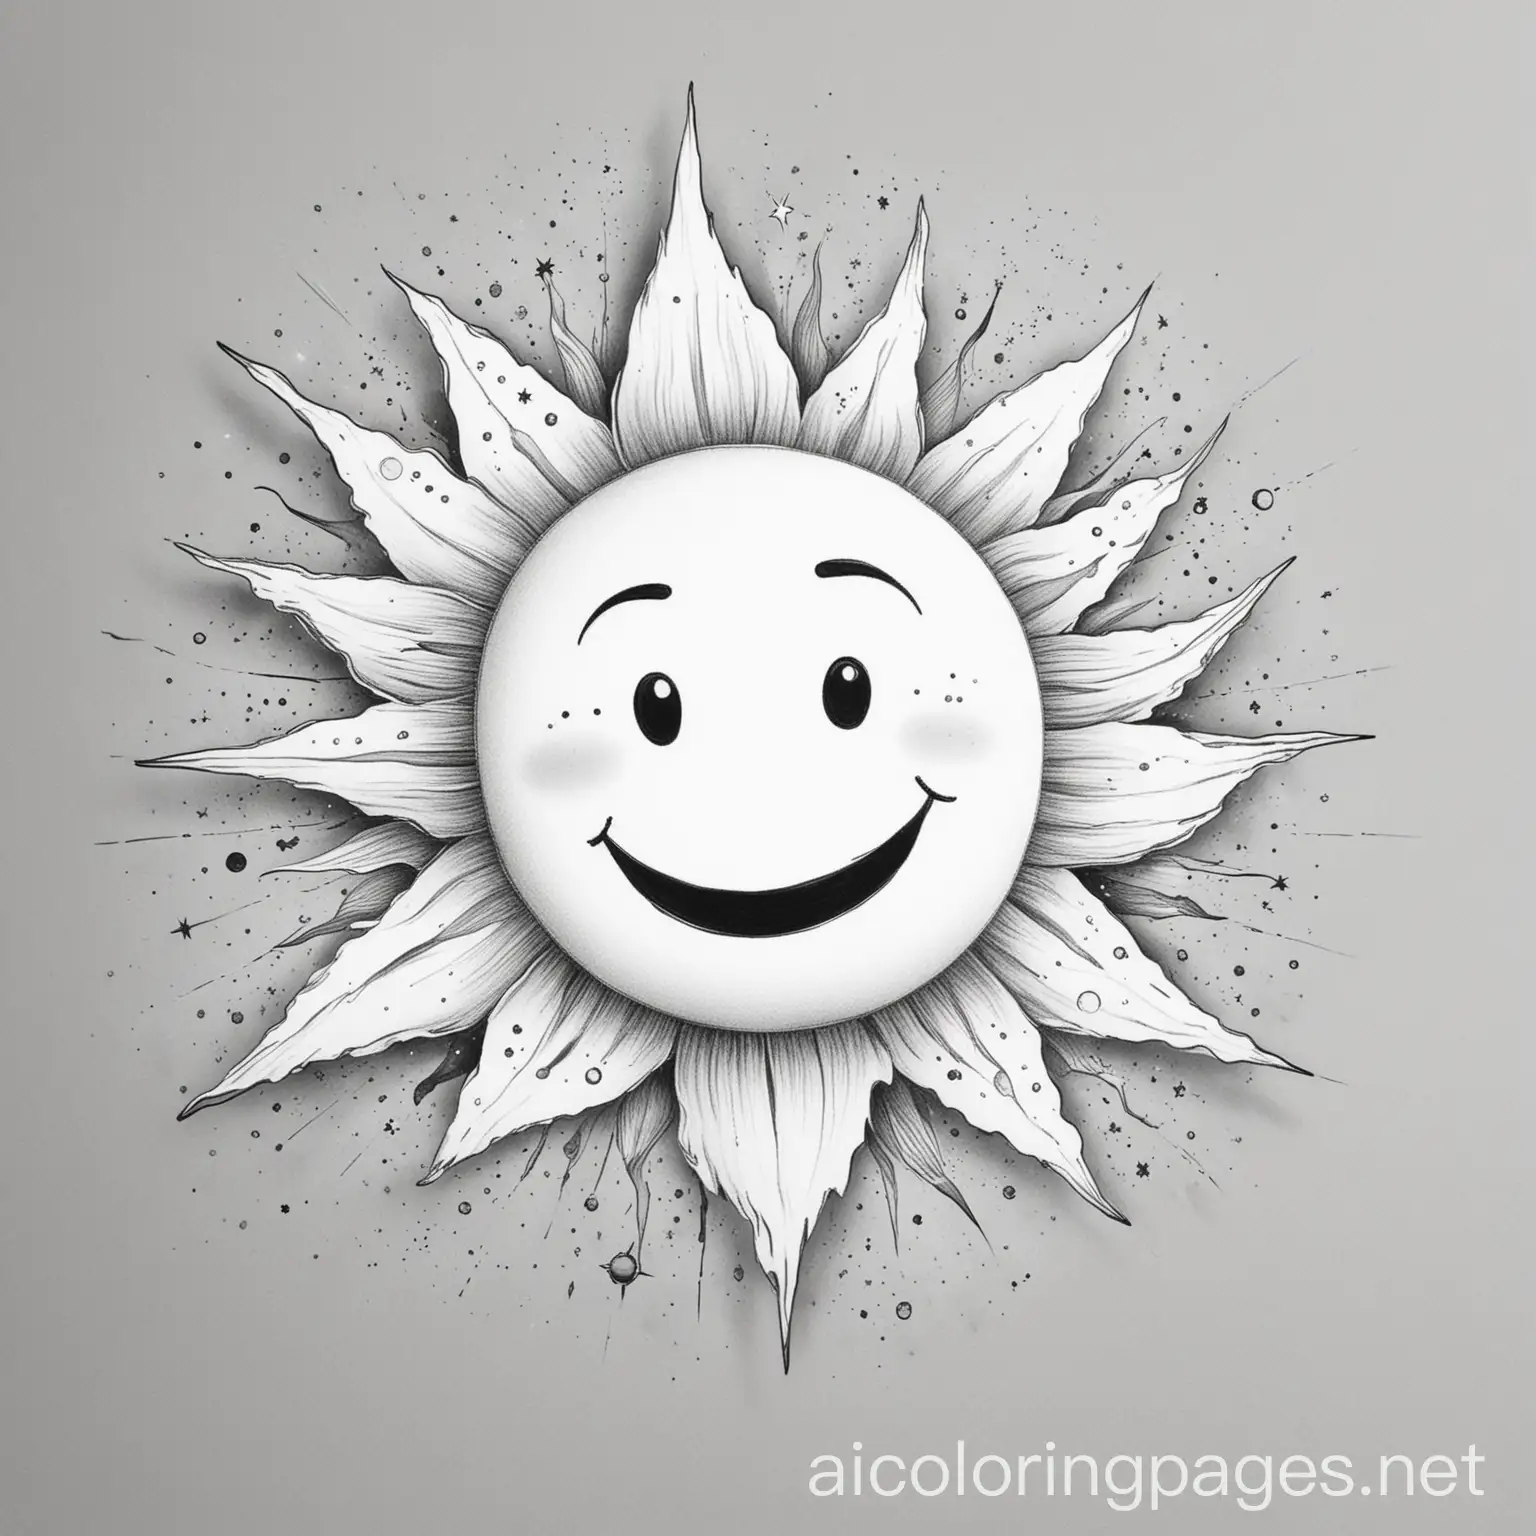 smiling sun in space, Coloring Page, black and white, line art, white background, Simplicity, Ample White Space